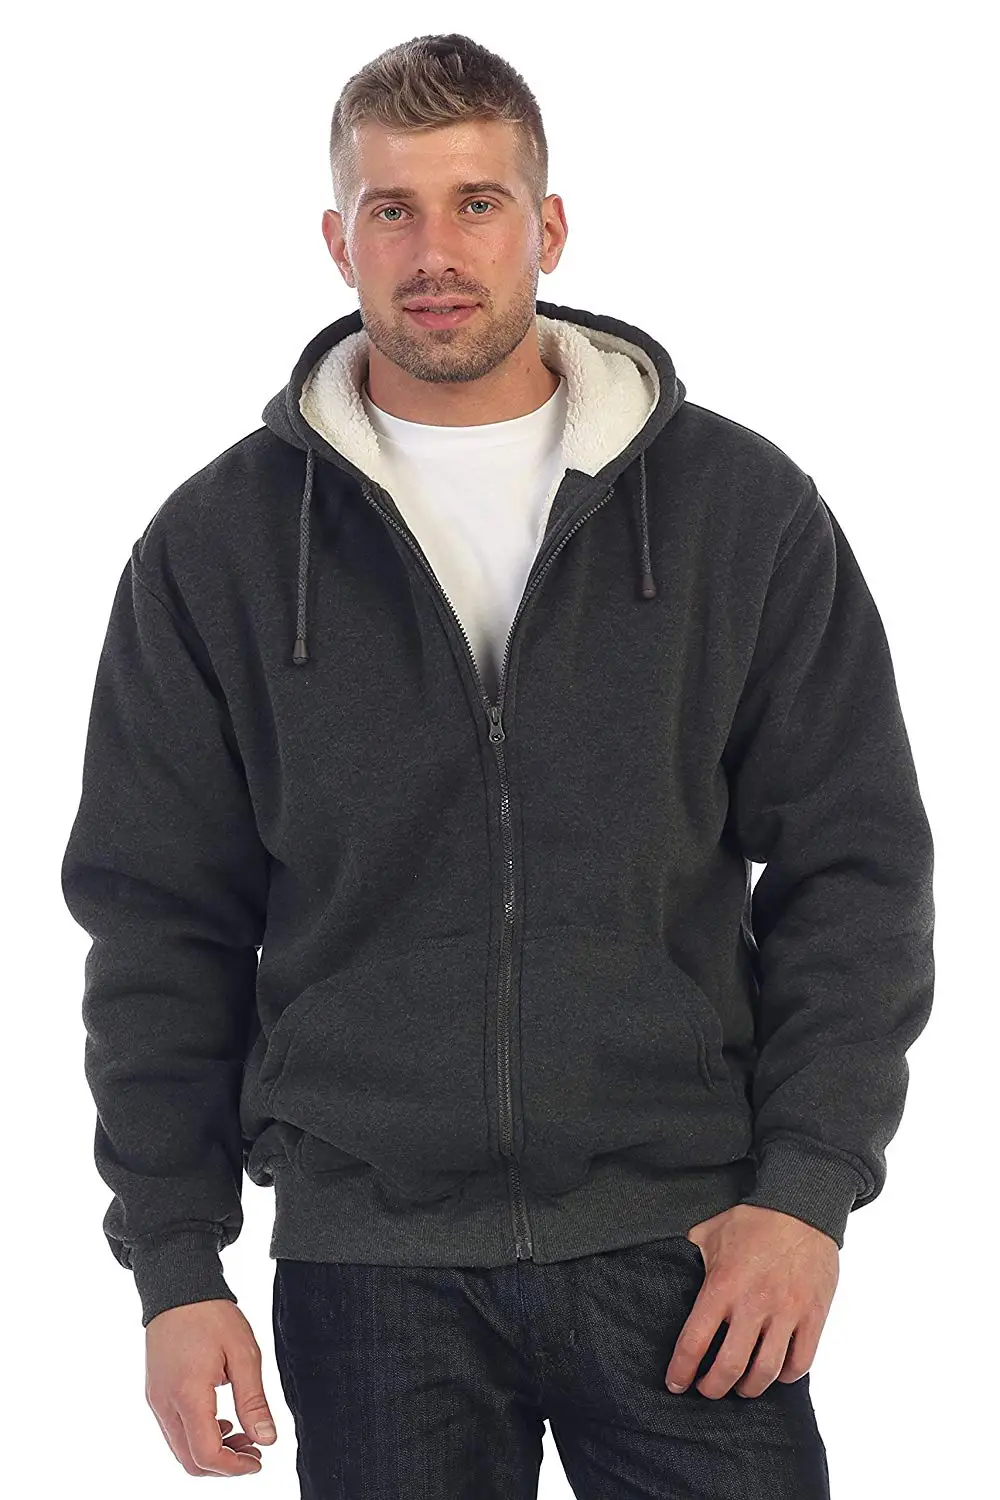 Cheap Sherpa Lined Mens Jacket, find Sherpa Lined Mens Jacket deals on ...